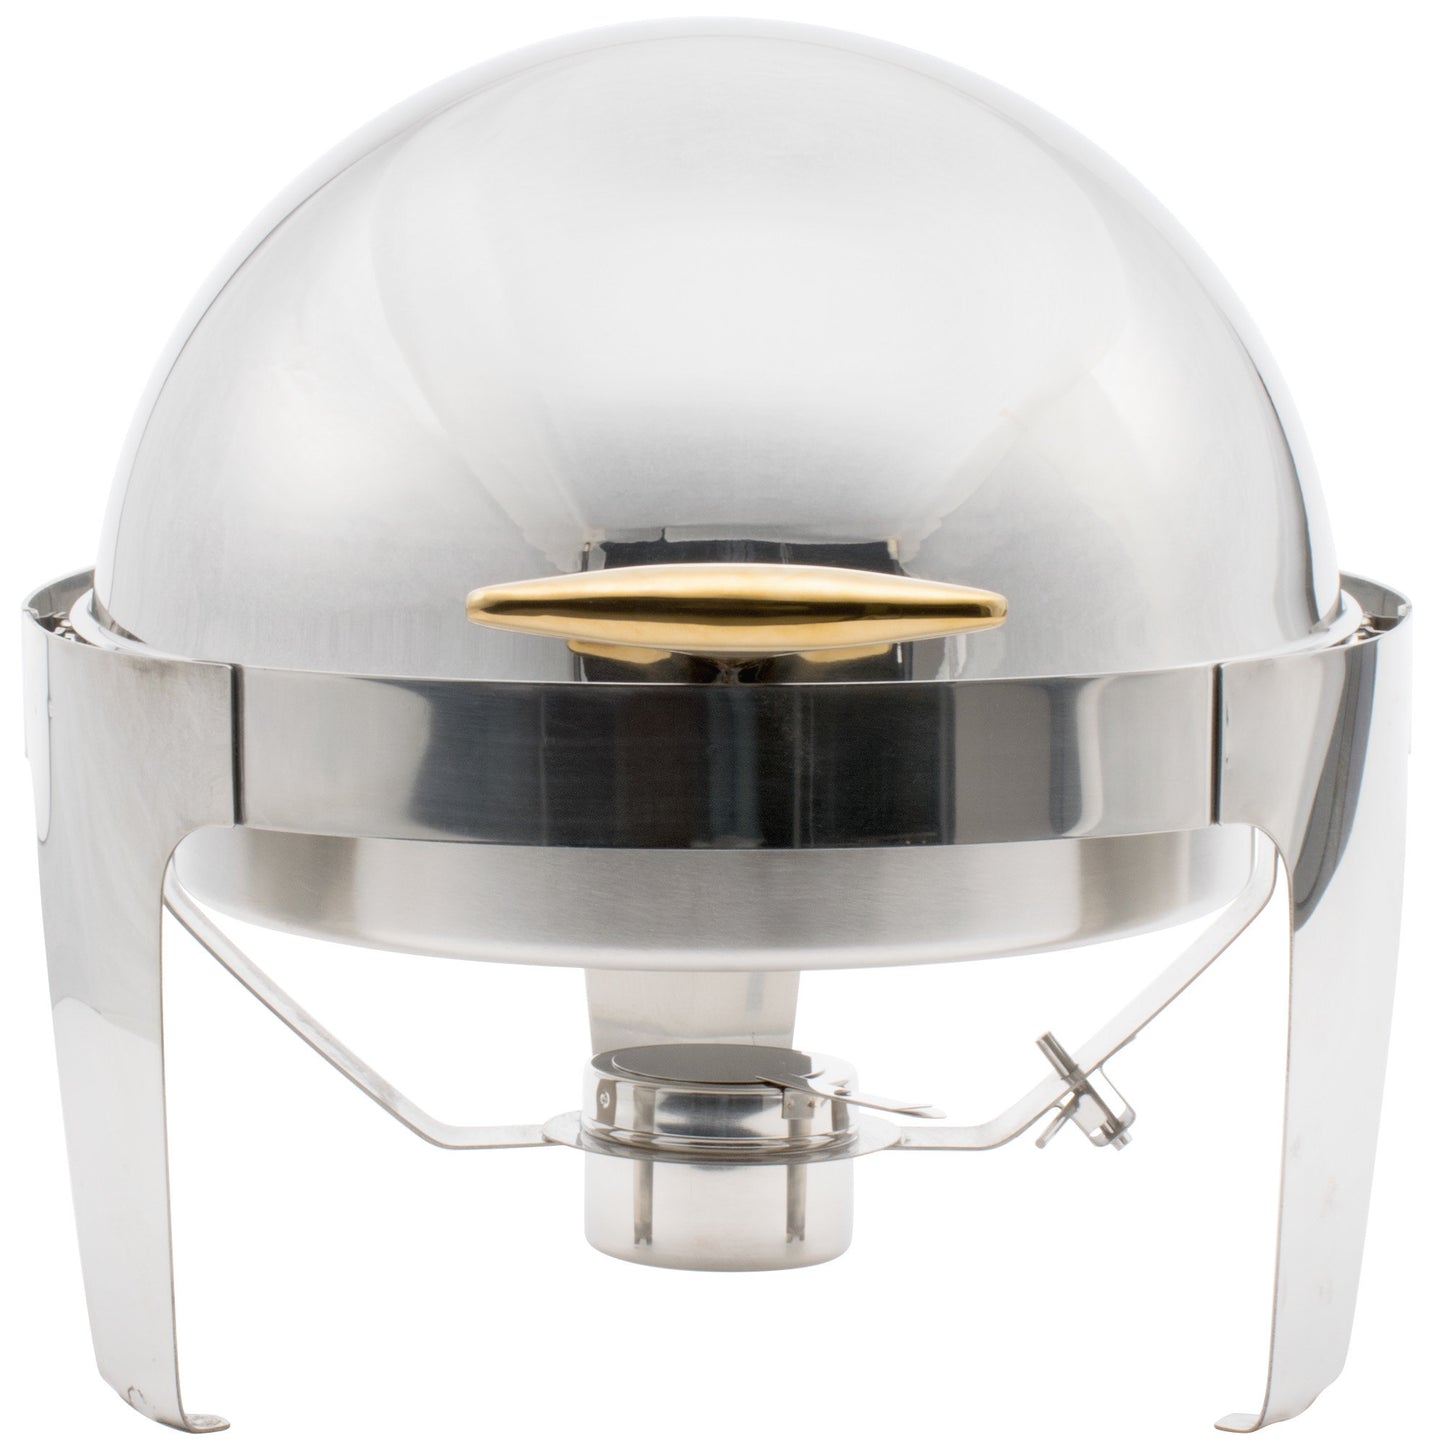 Round Food Warmer With Gold Handle 6.5QT-chafer-6.5 Qt-silver with gold handle-Free Item Online